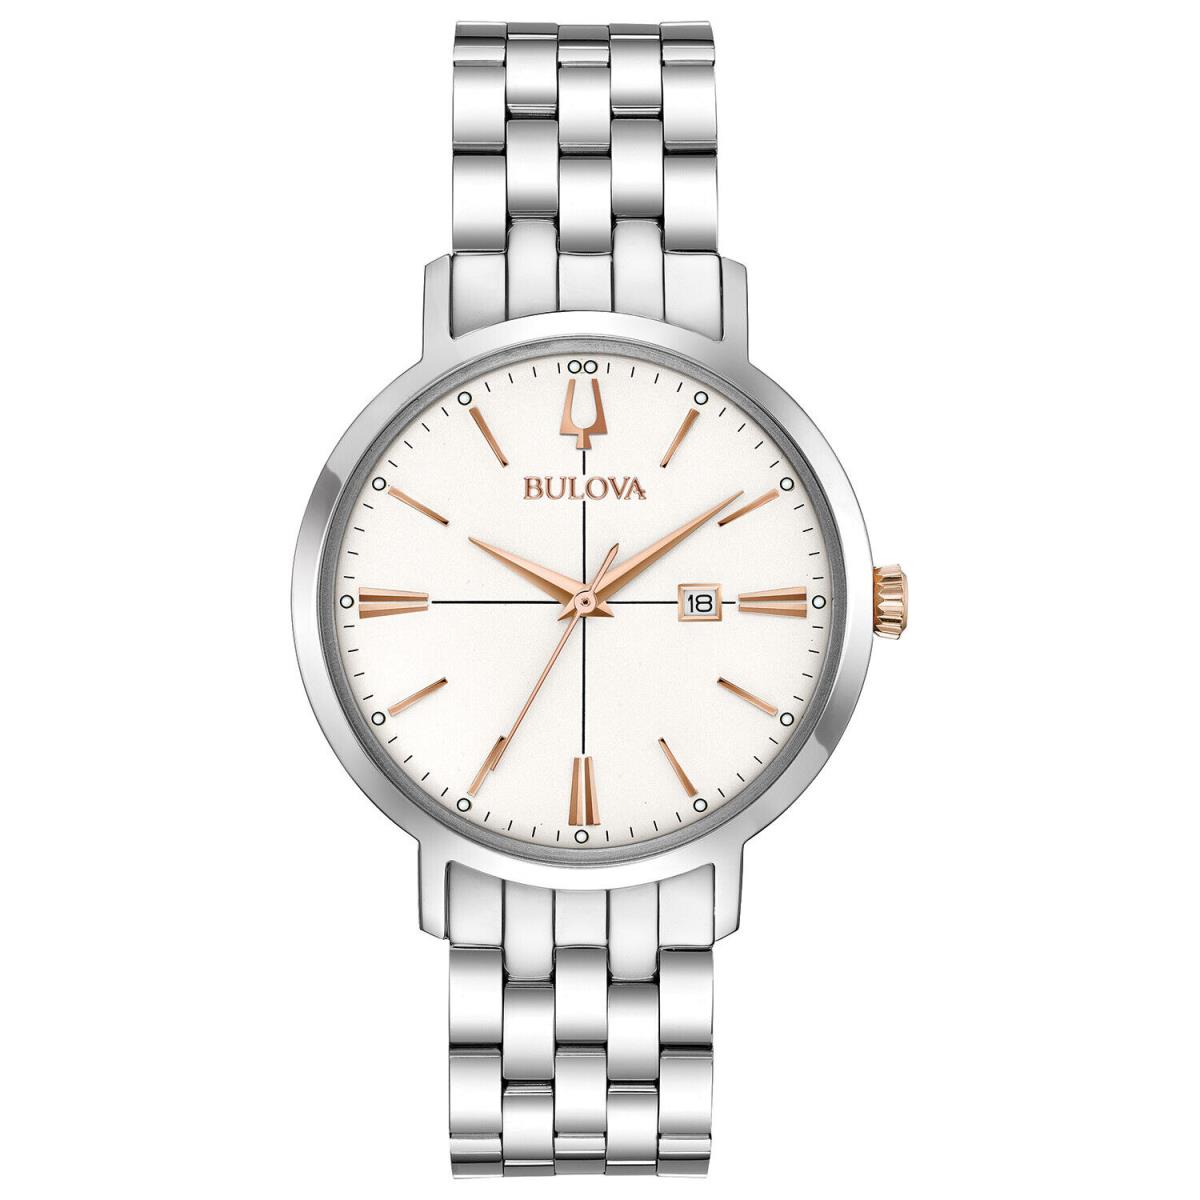 Bulova Women`s Aerojet Rose Gold Accents Silver Tone 34.5mm Watch 98M130 - Gray Dial, Silver Band